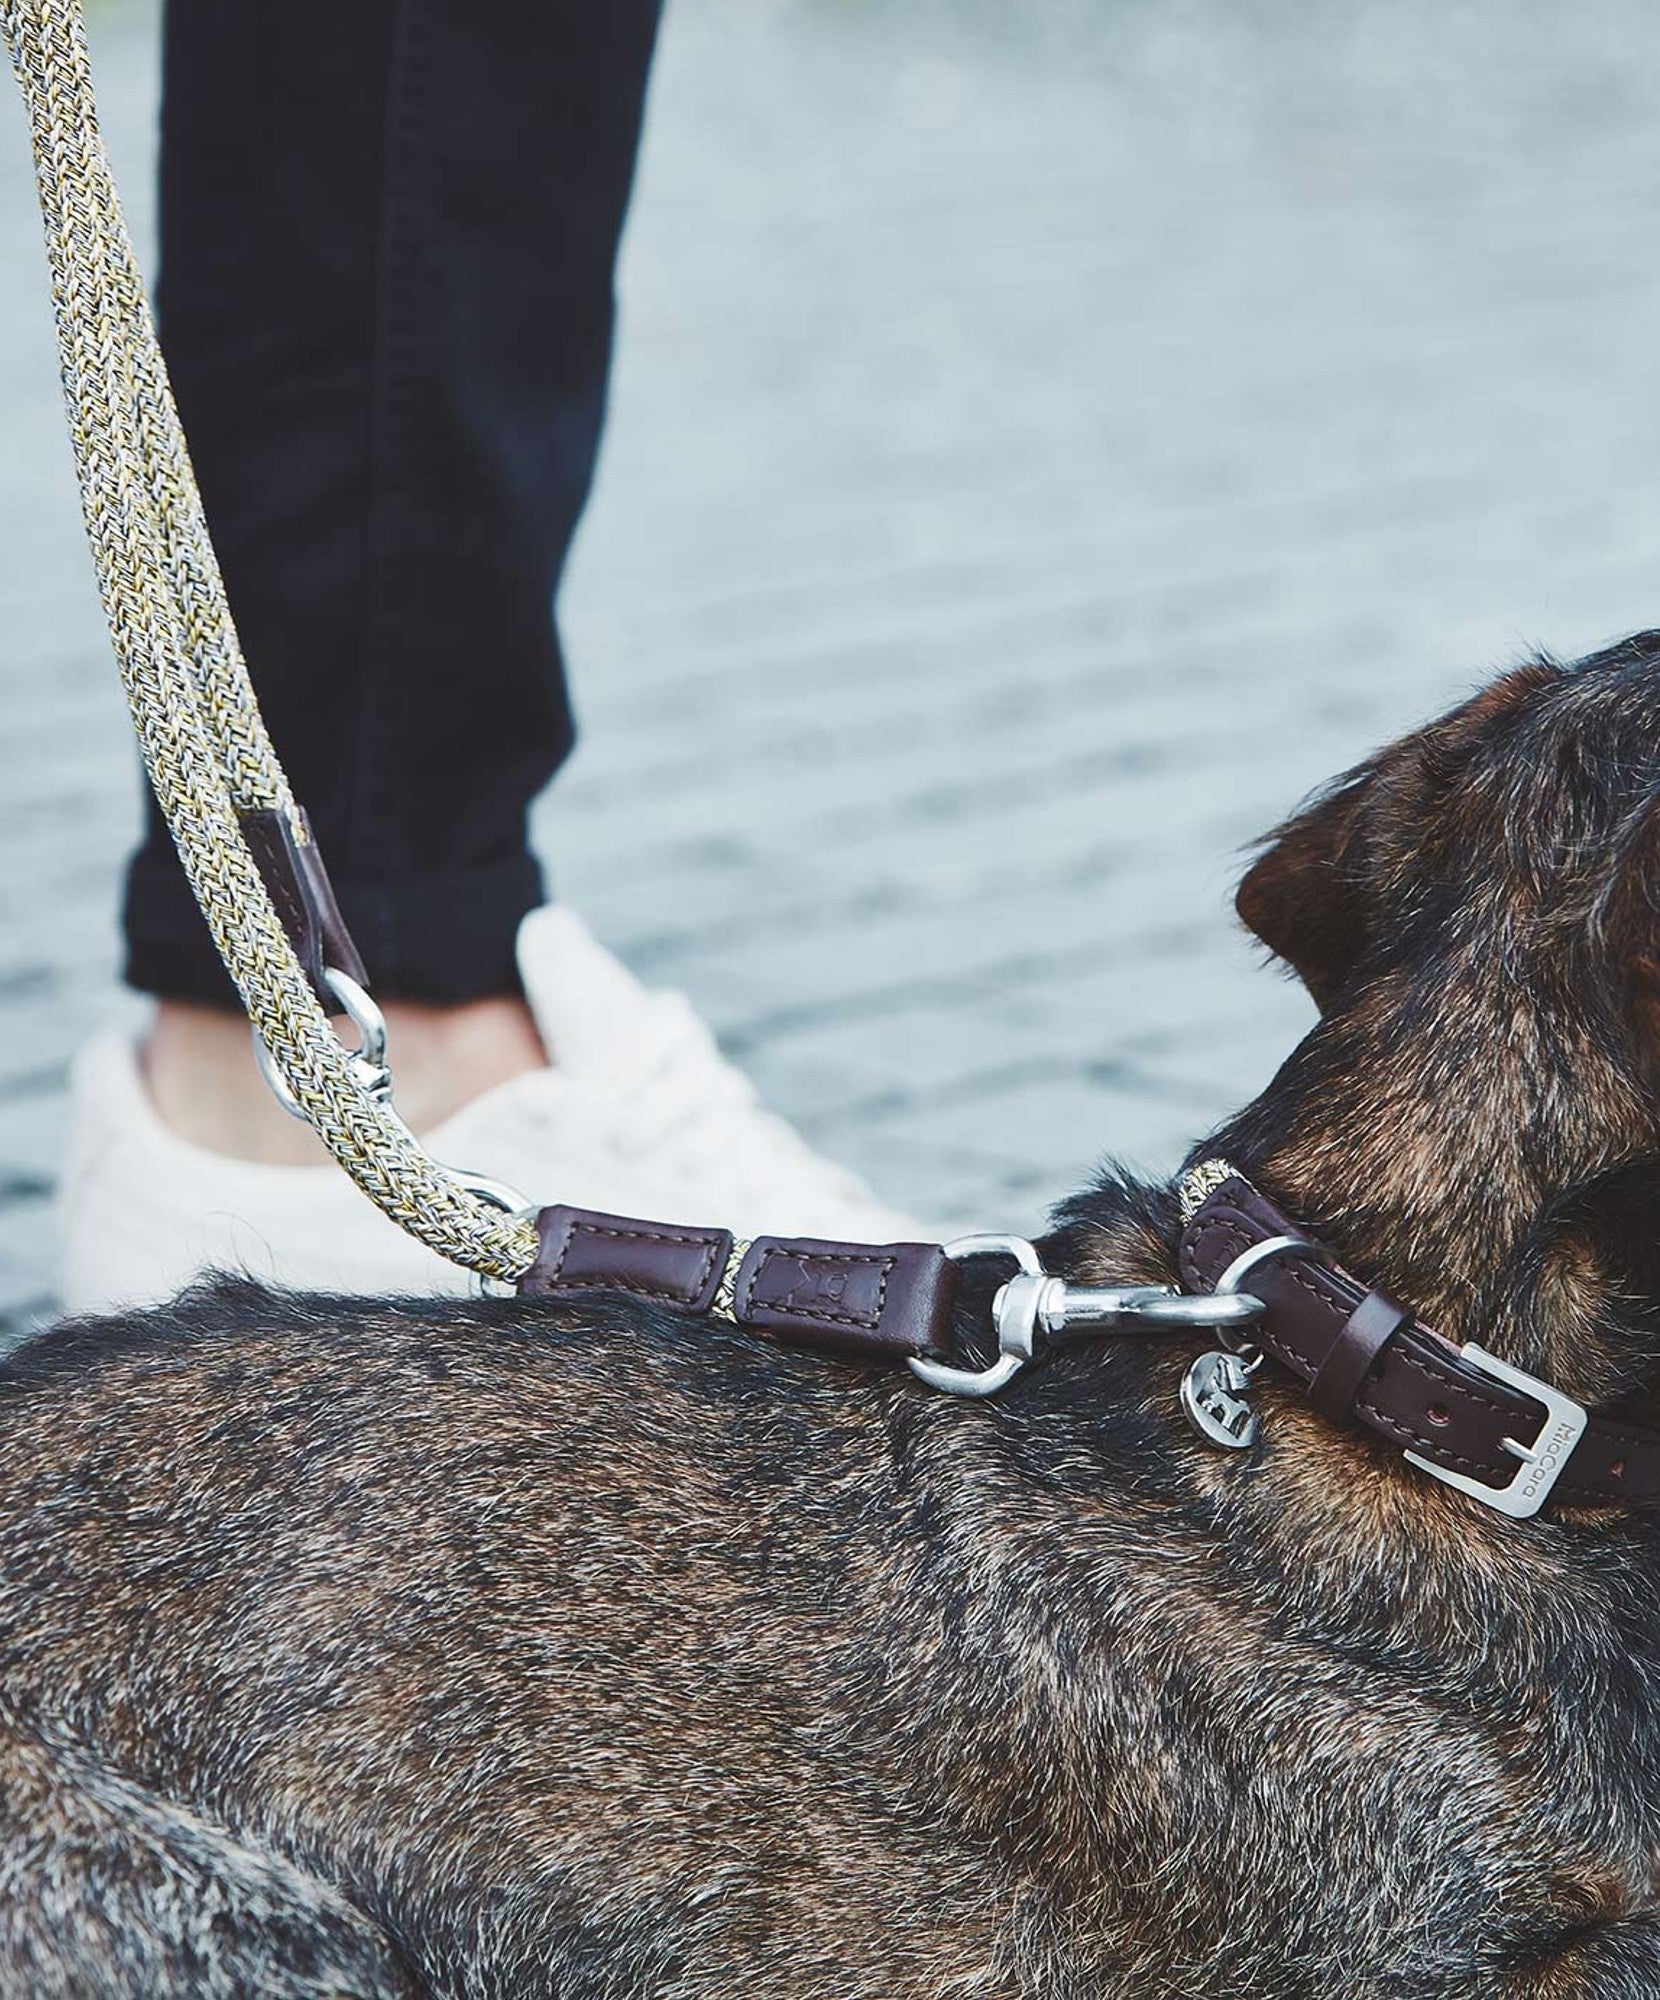 Durable and chic leash for dog walks